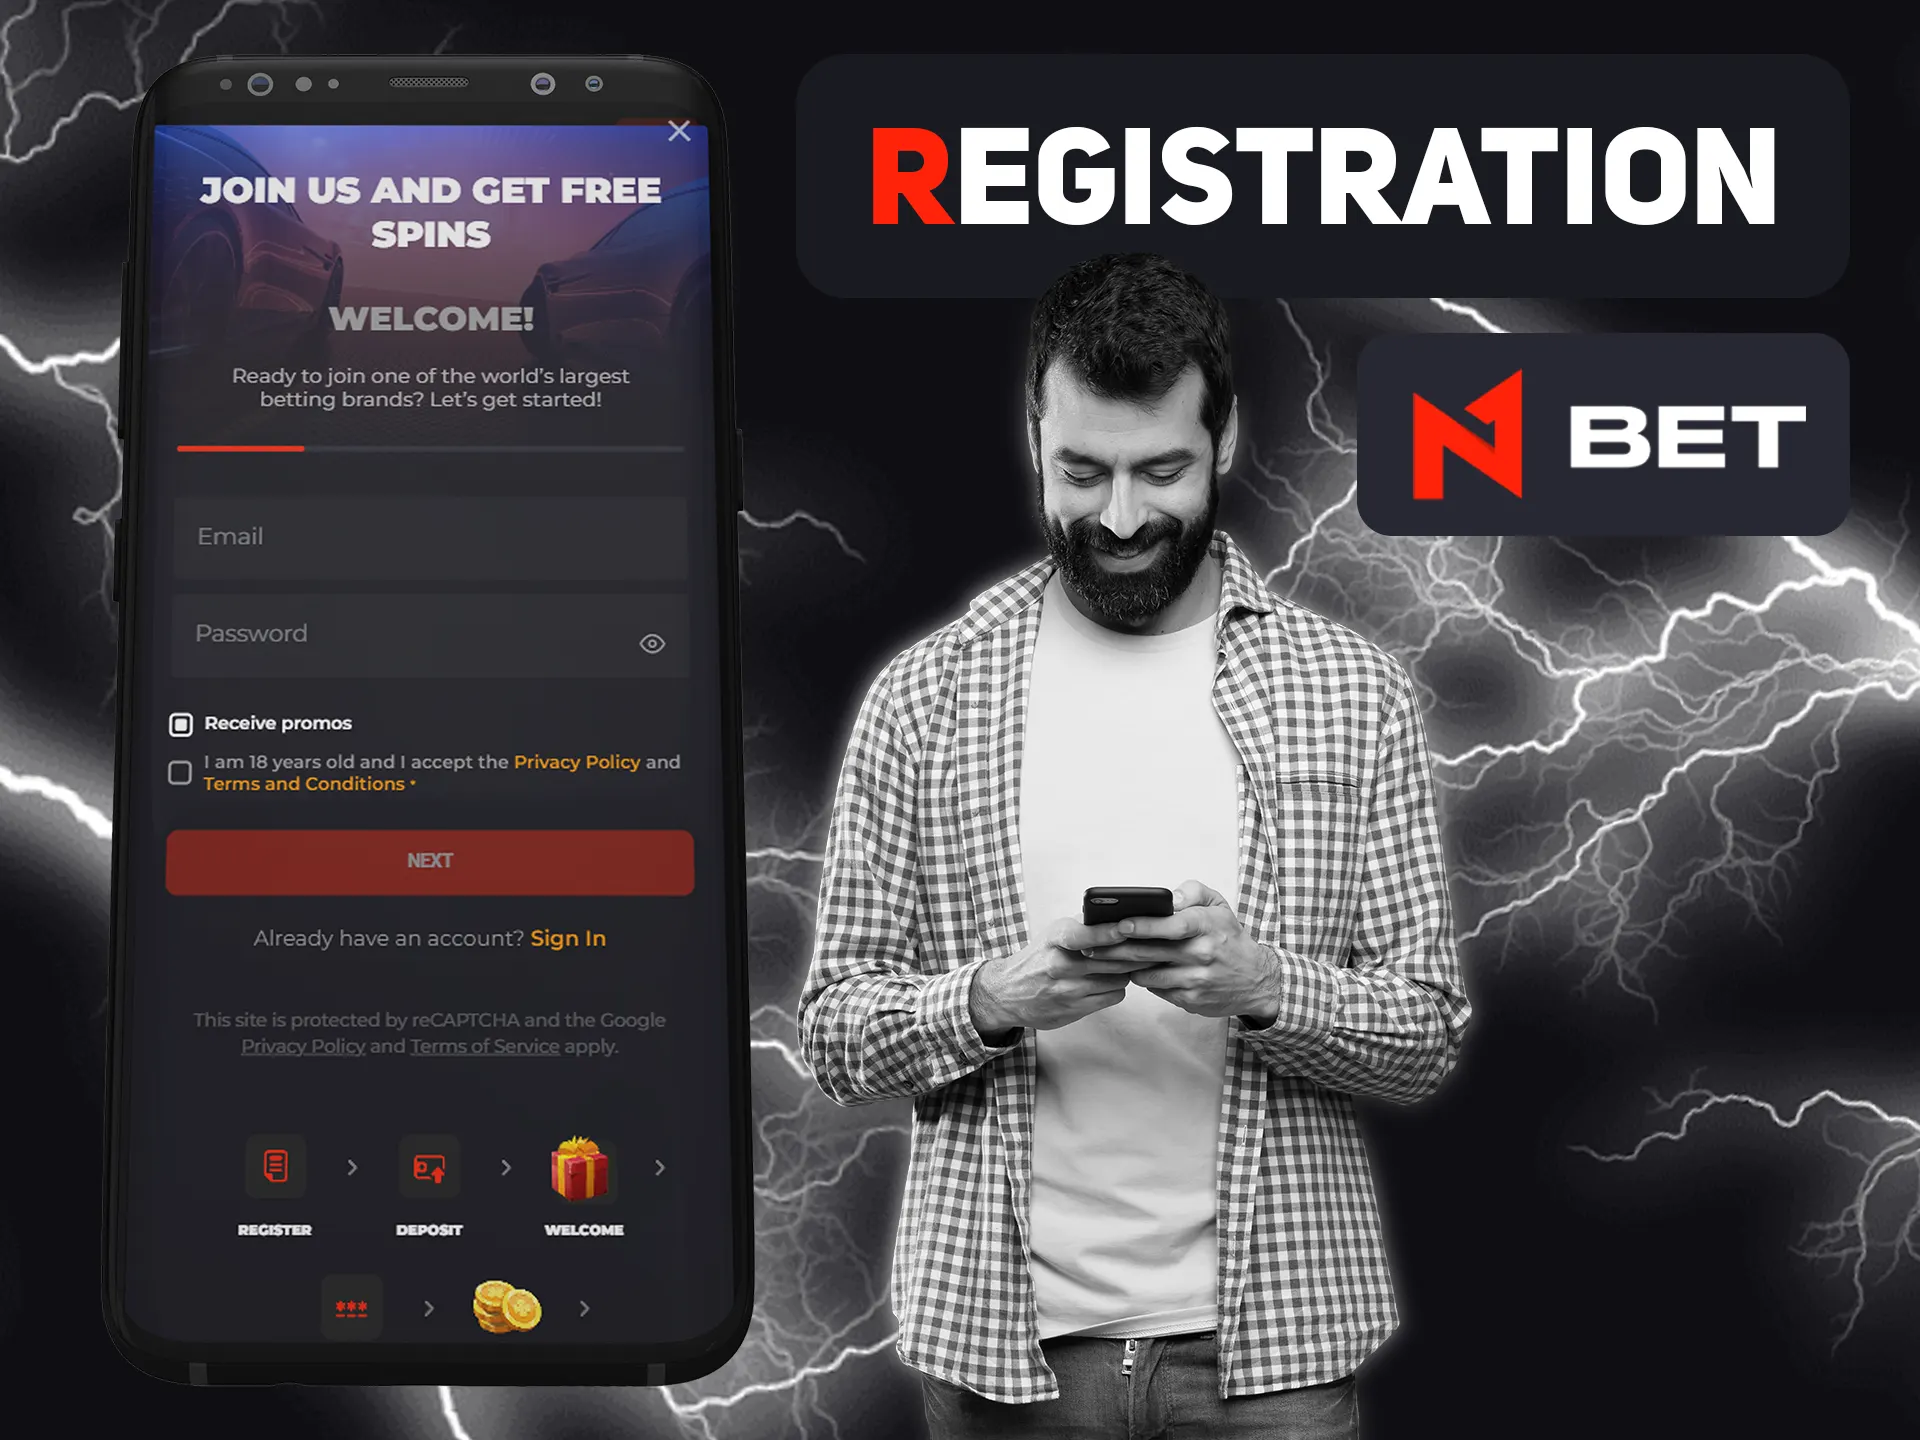 Register new N1bet account quicker with app.